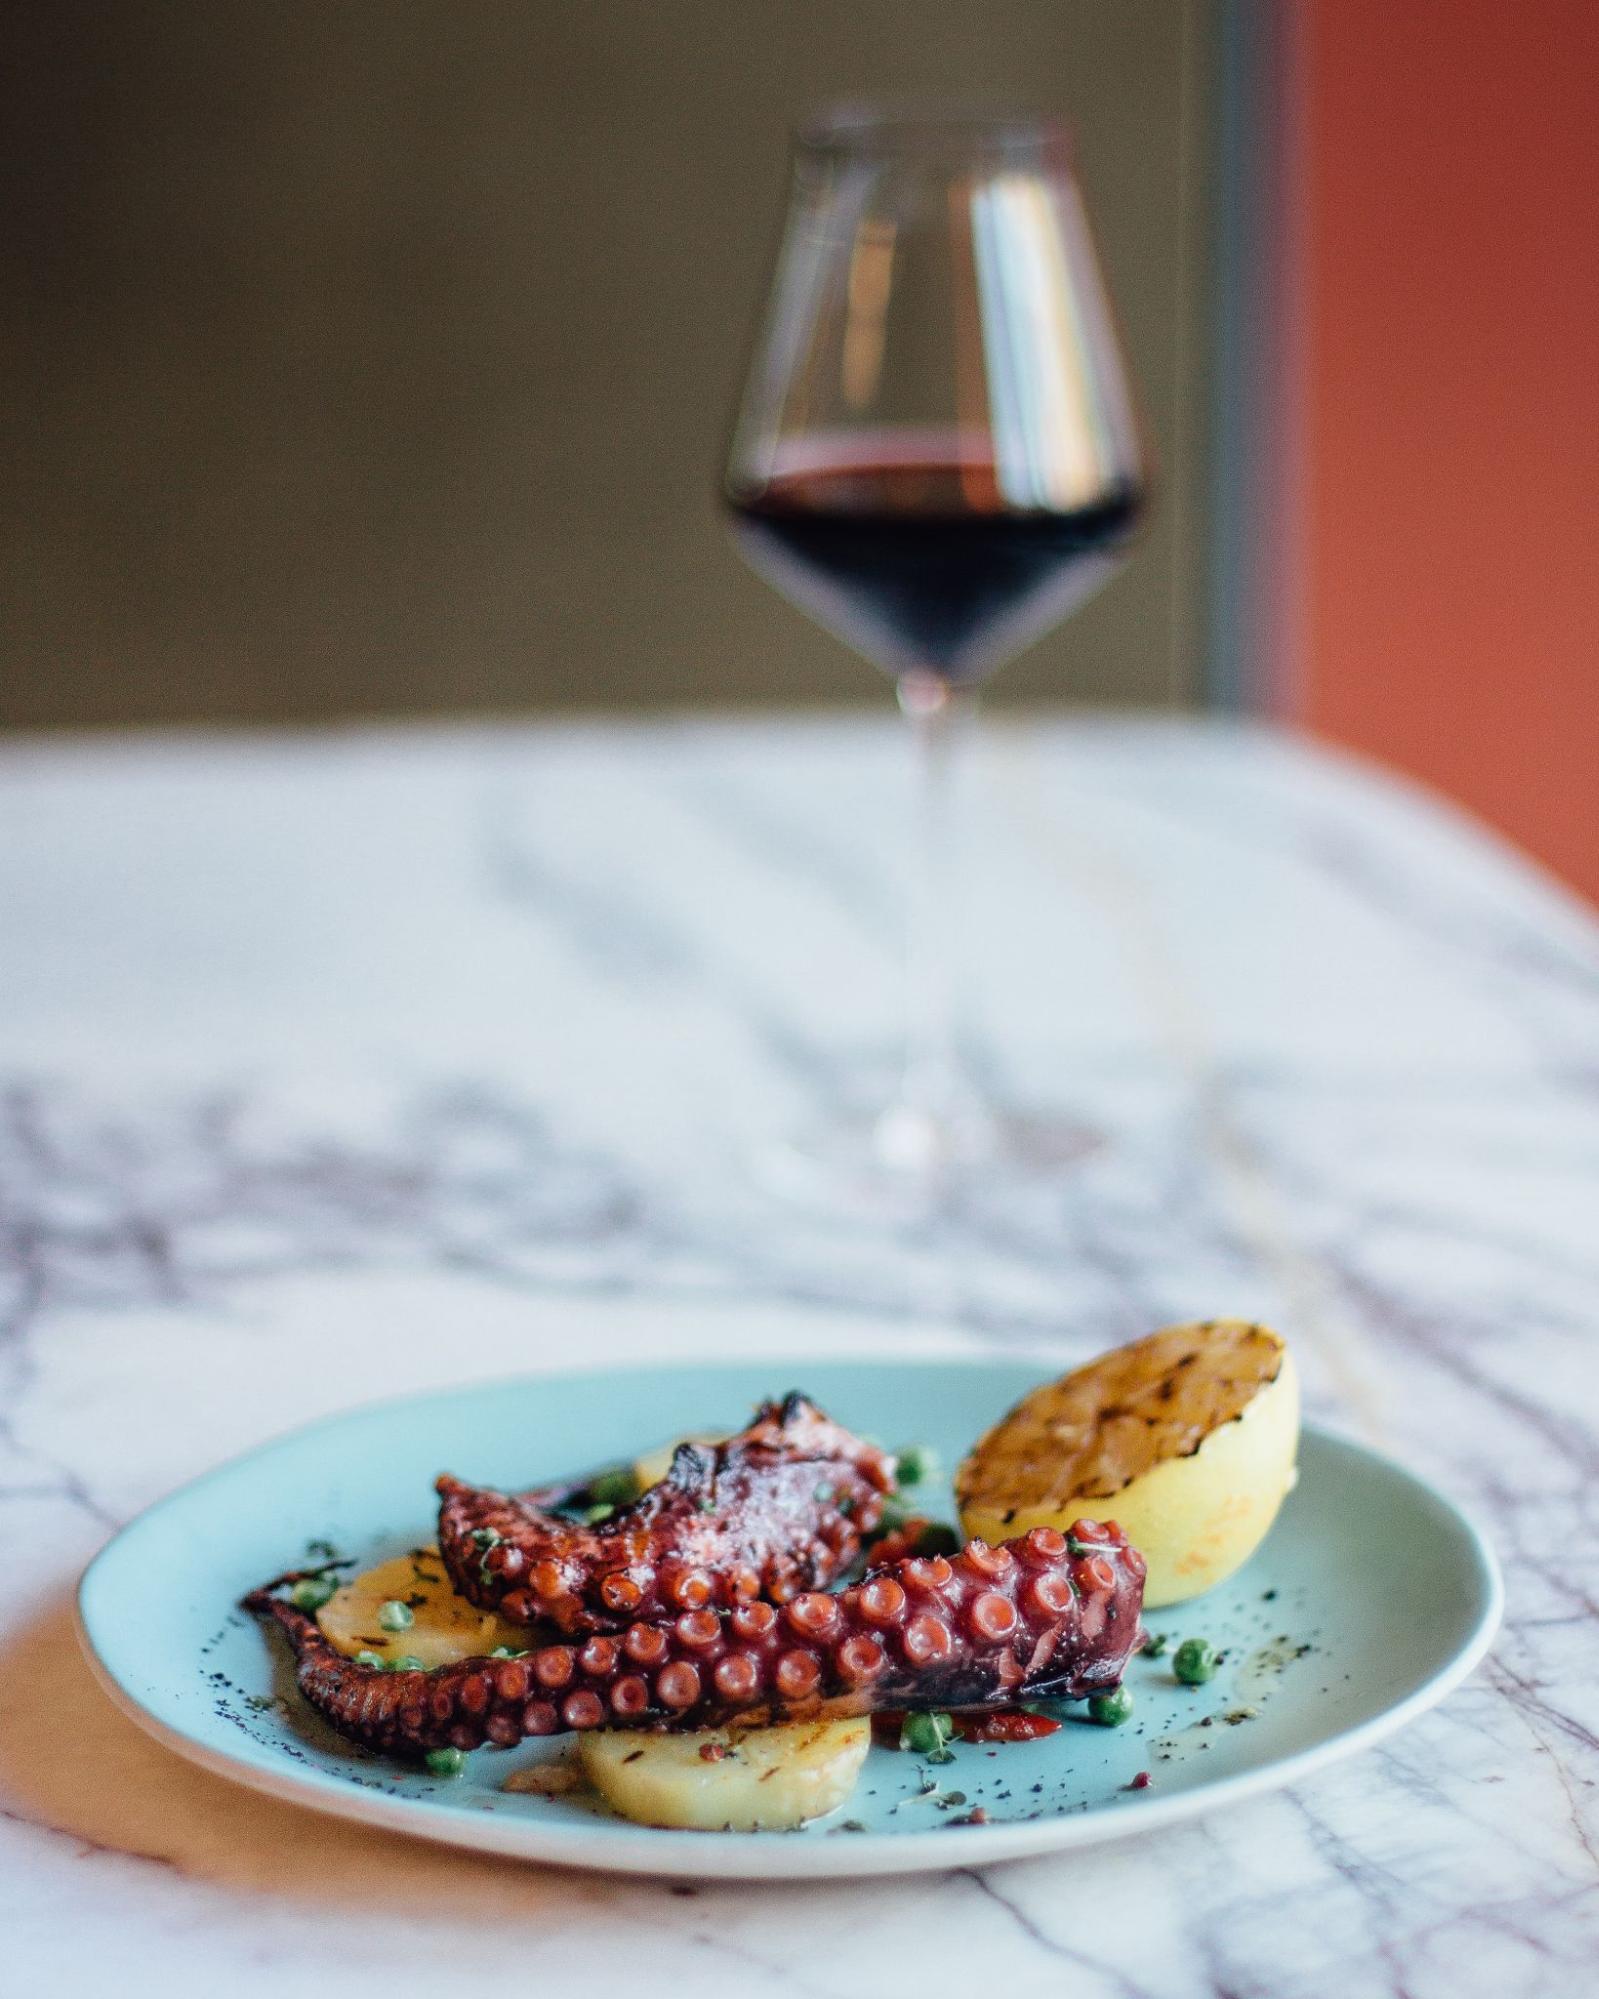 Plated octopus with sides and a grilled lemon half and a glass of red wine